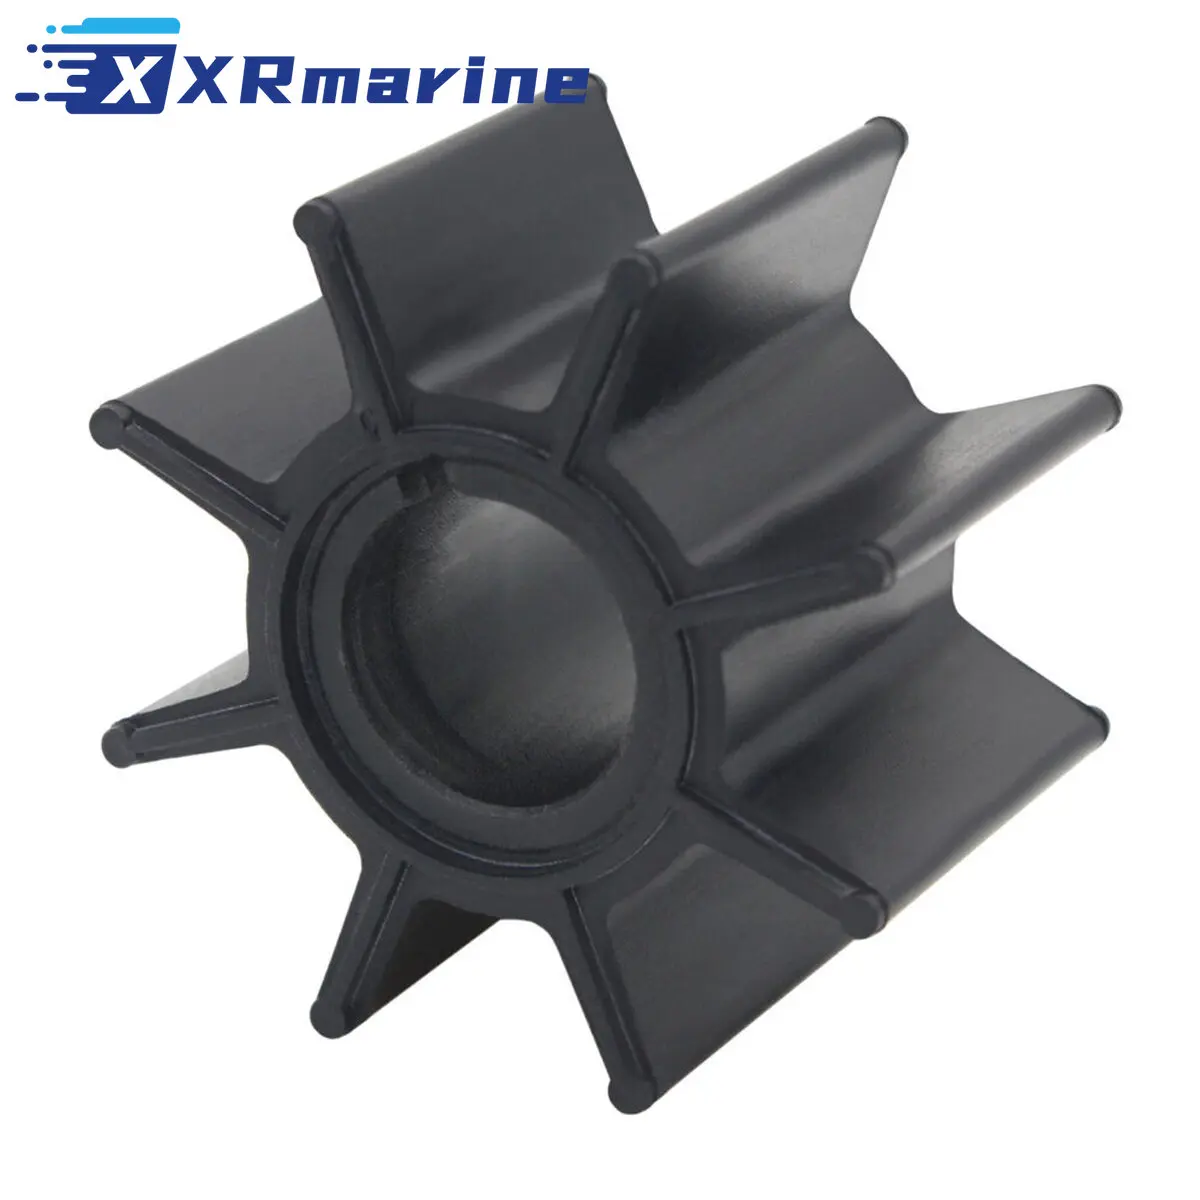 334-65021-0 Water Pump Impeller 334-65021-0M for Tohatsu Outboard Motor 334650210 9.9 15 18 20 HP 334650210M boat engine water pump impeller 309 65021 1 for nissan tohatsu 2 5hp 3 5hp outboard motors parts